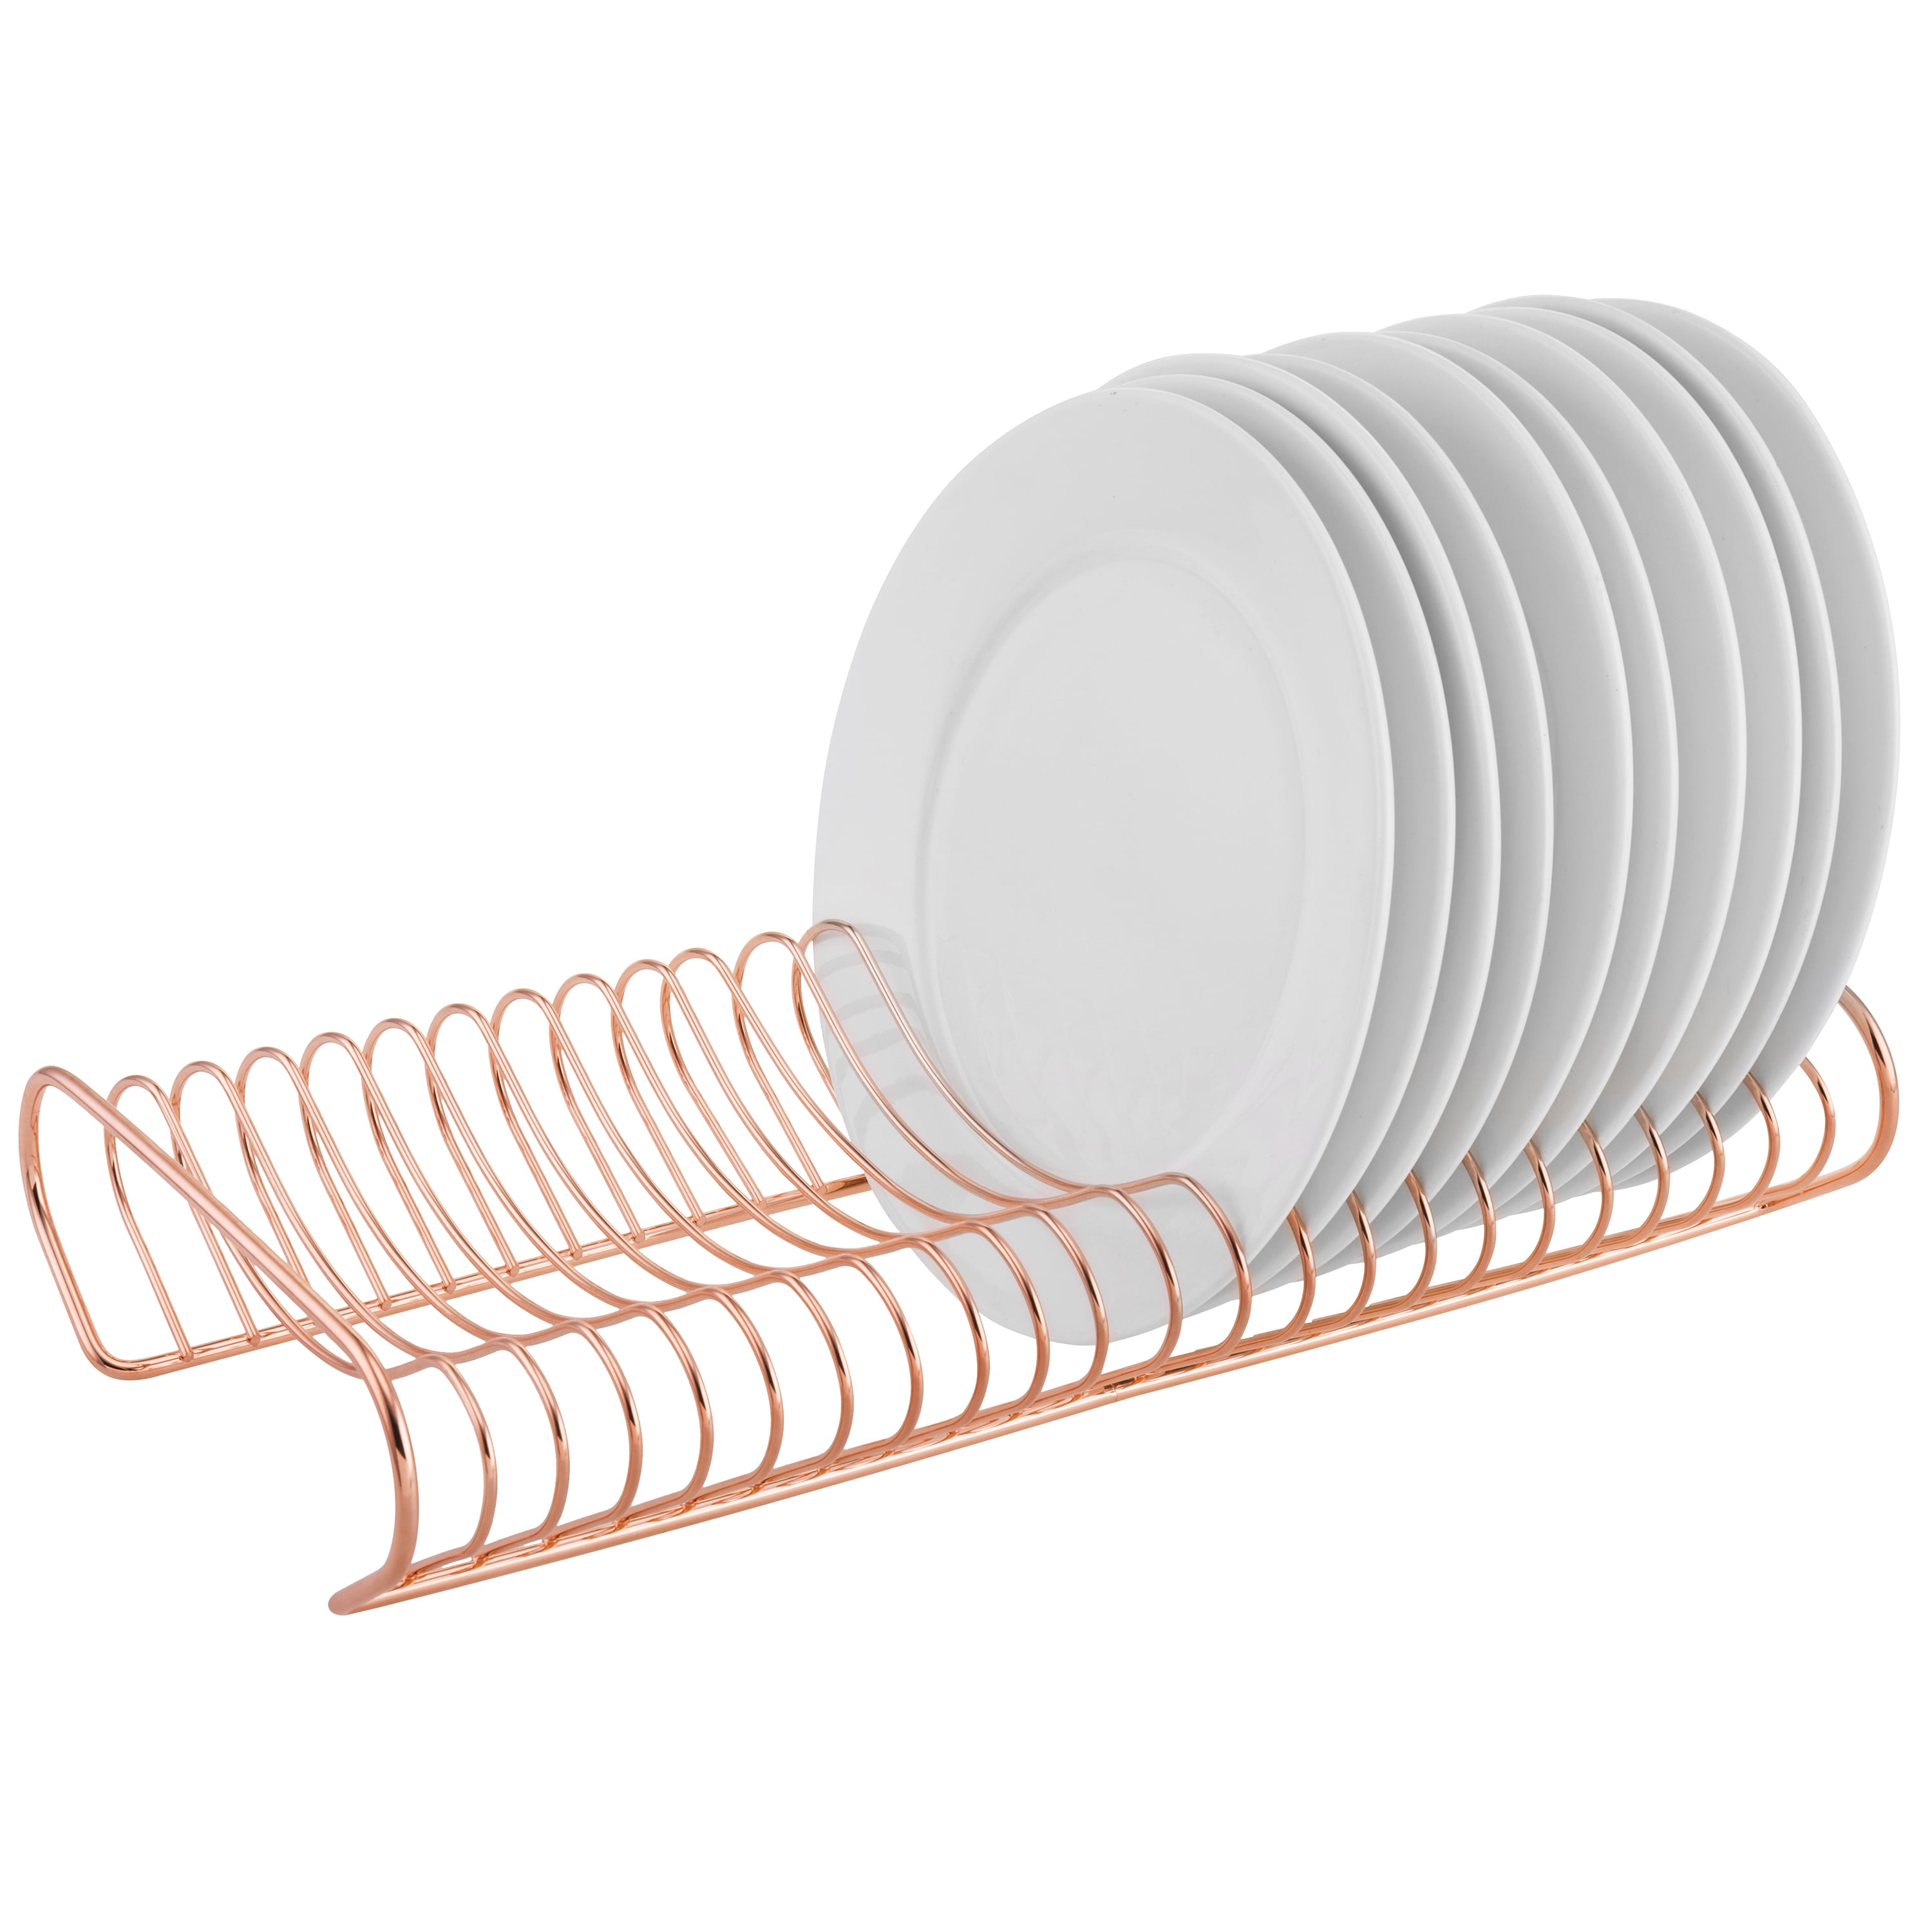 Cups Dish Drying Rack Drainer Storage Organizer Pots MyGift Pans Eco Friendly Bamboo Wood Plates